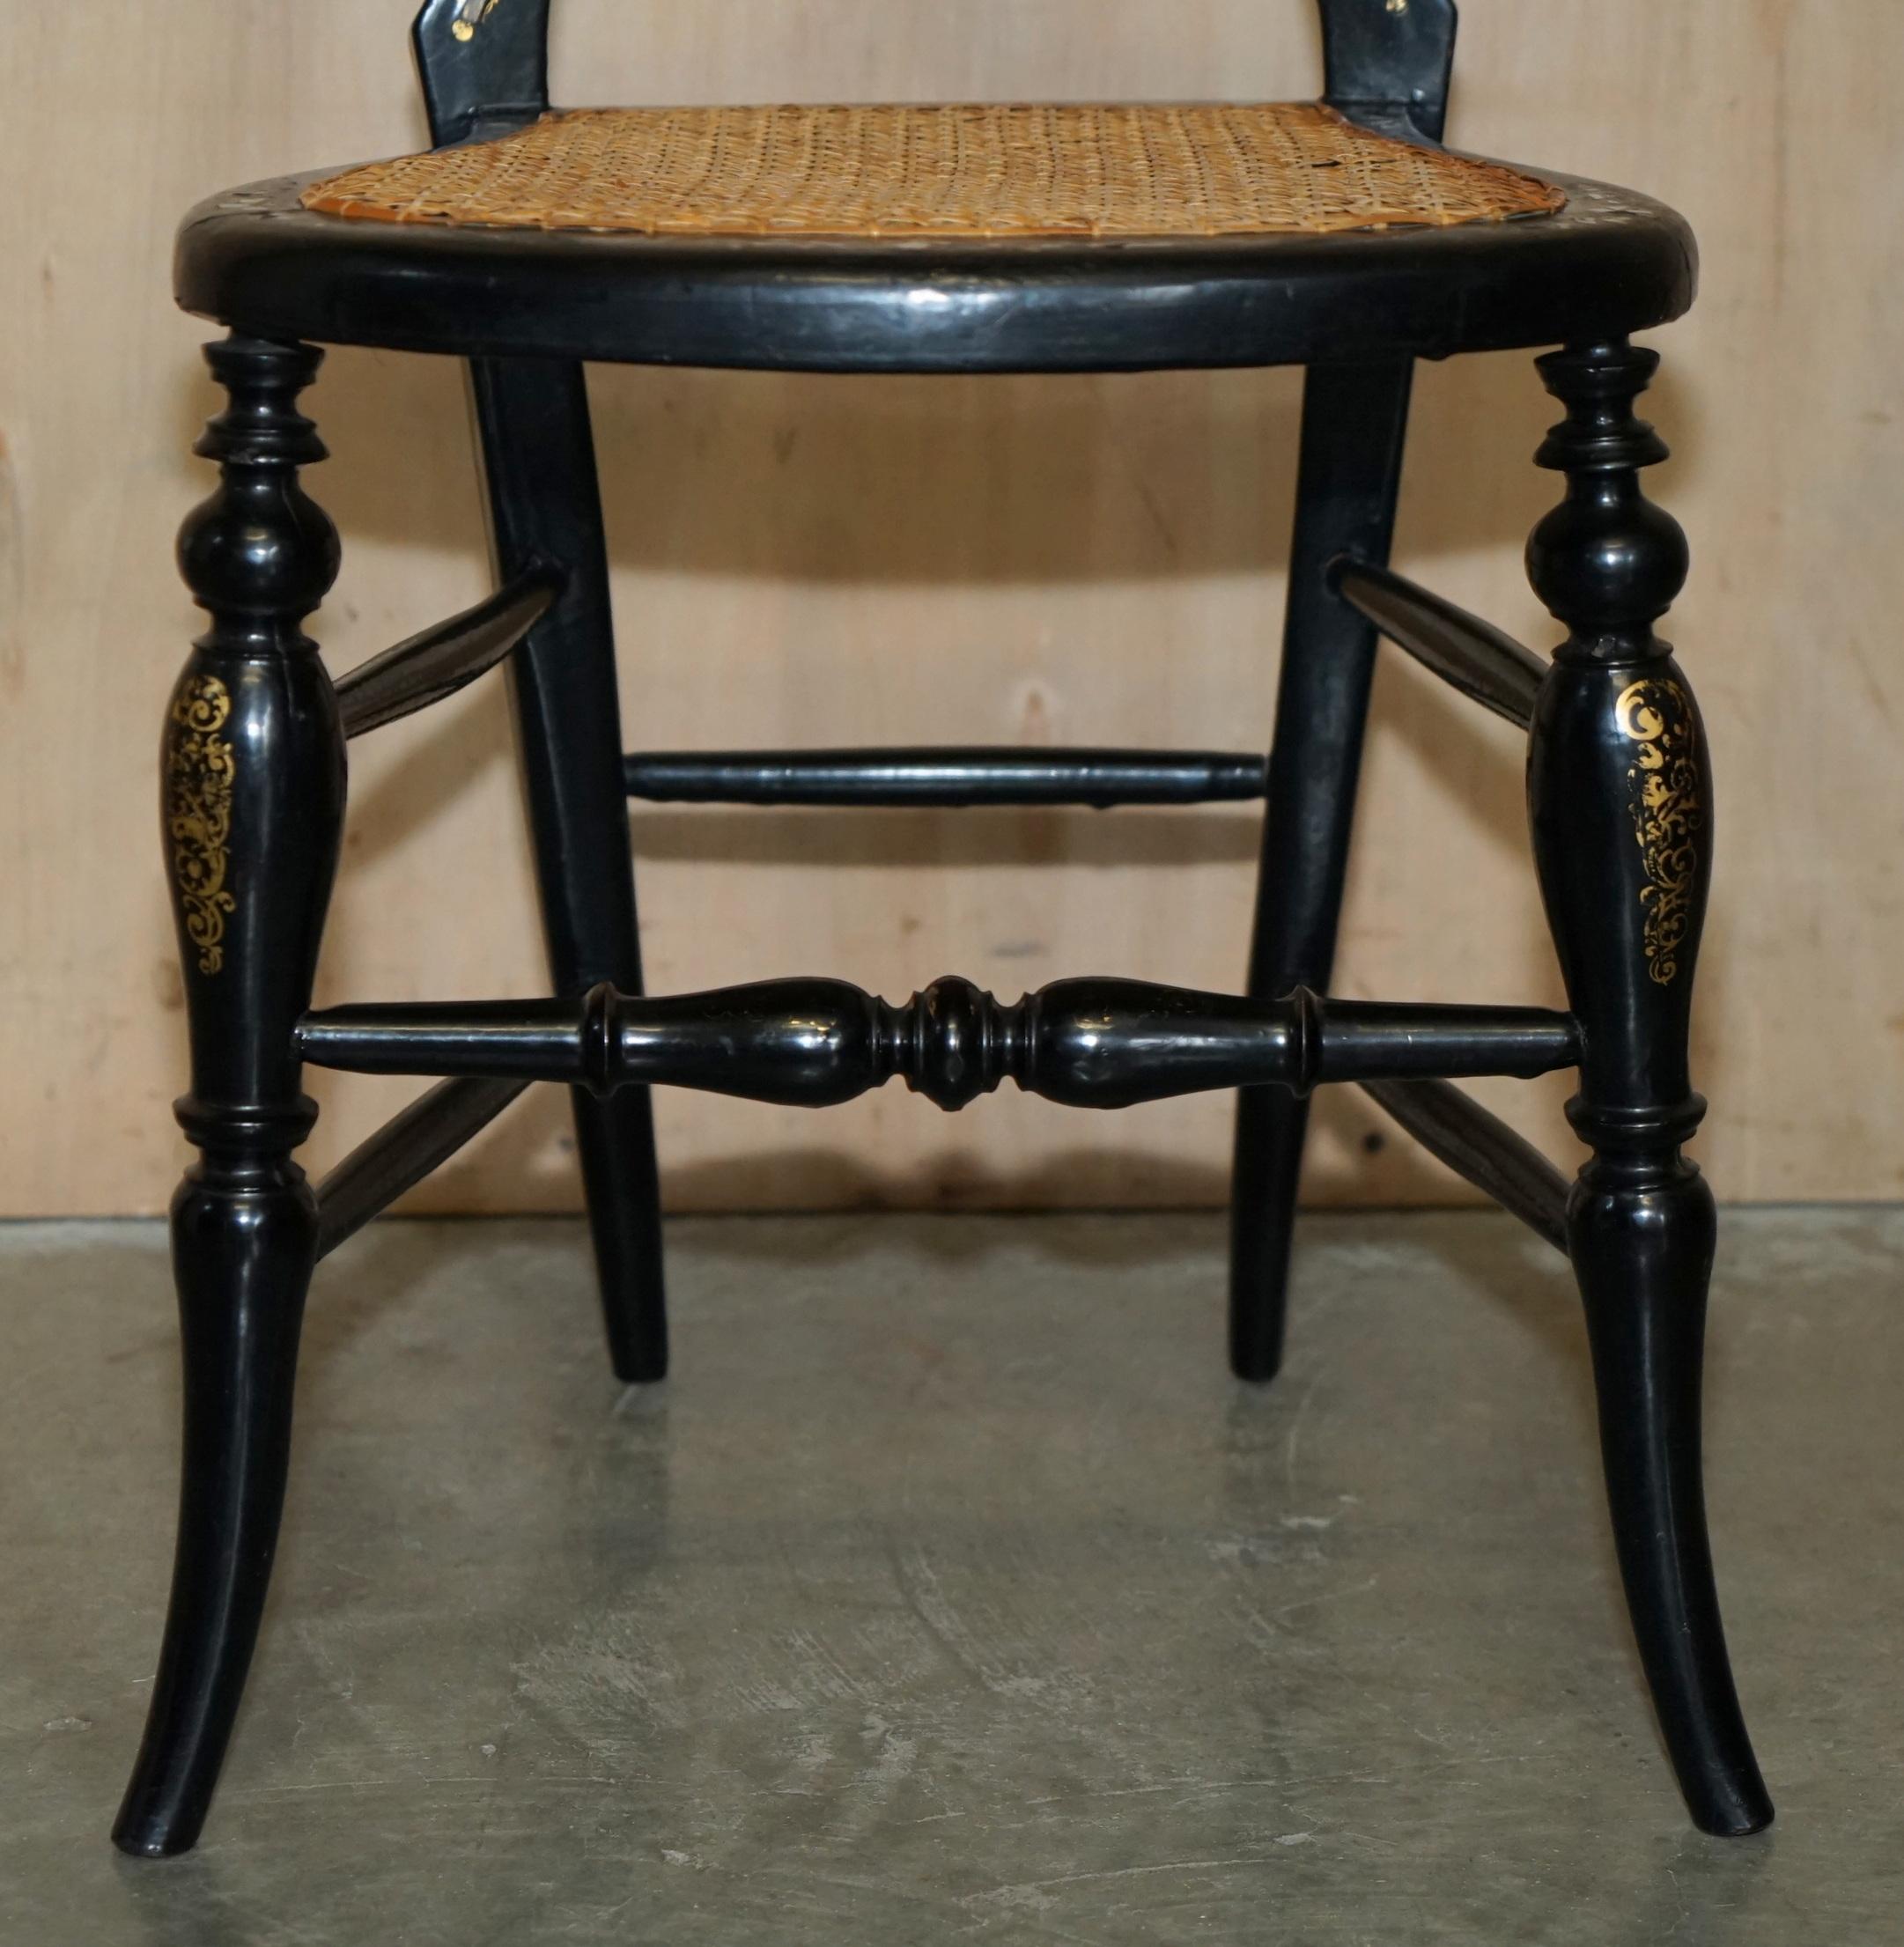 VIER FINE UND ANTIQUE REGENCY BERGERE MOTHER OF PEARL EBONISED SIDE CHAIRs im Angebot 4